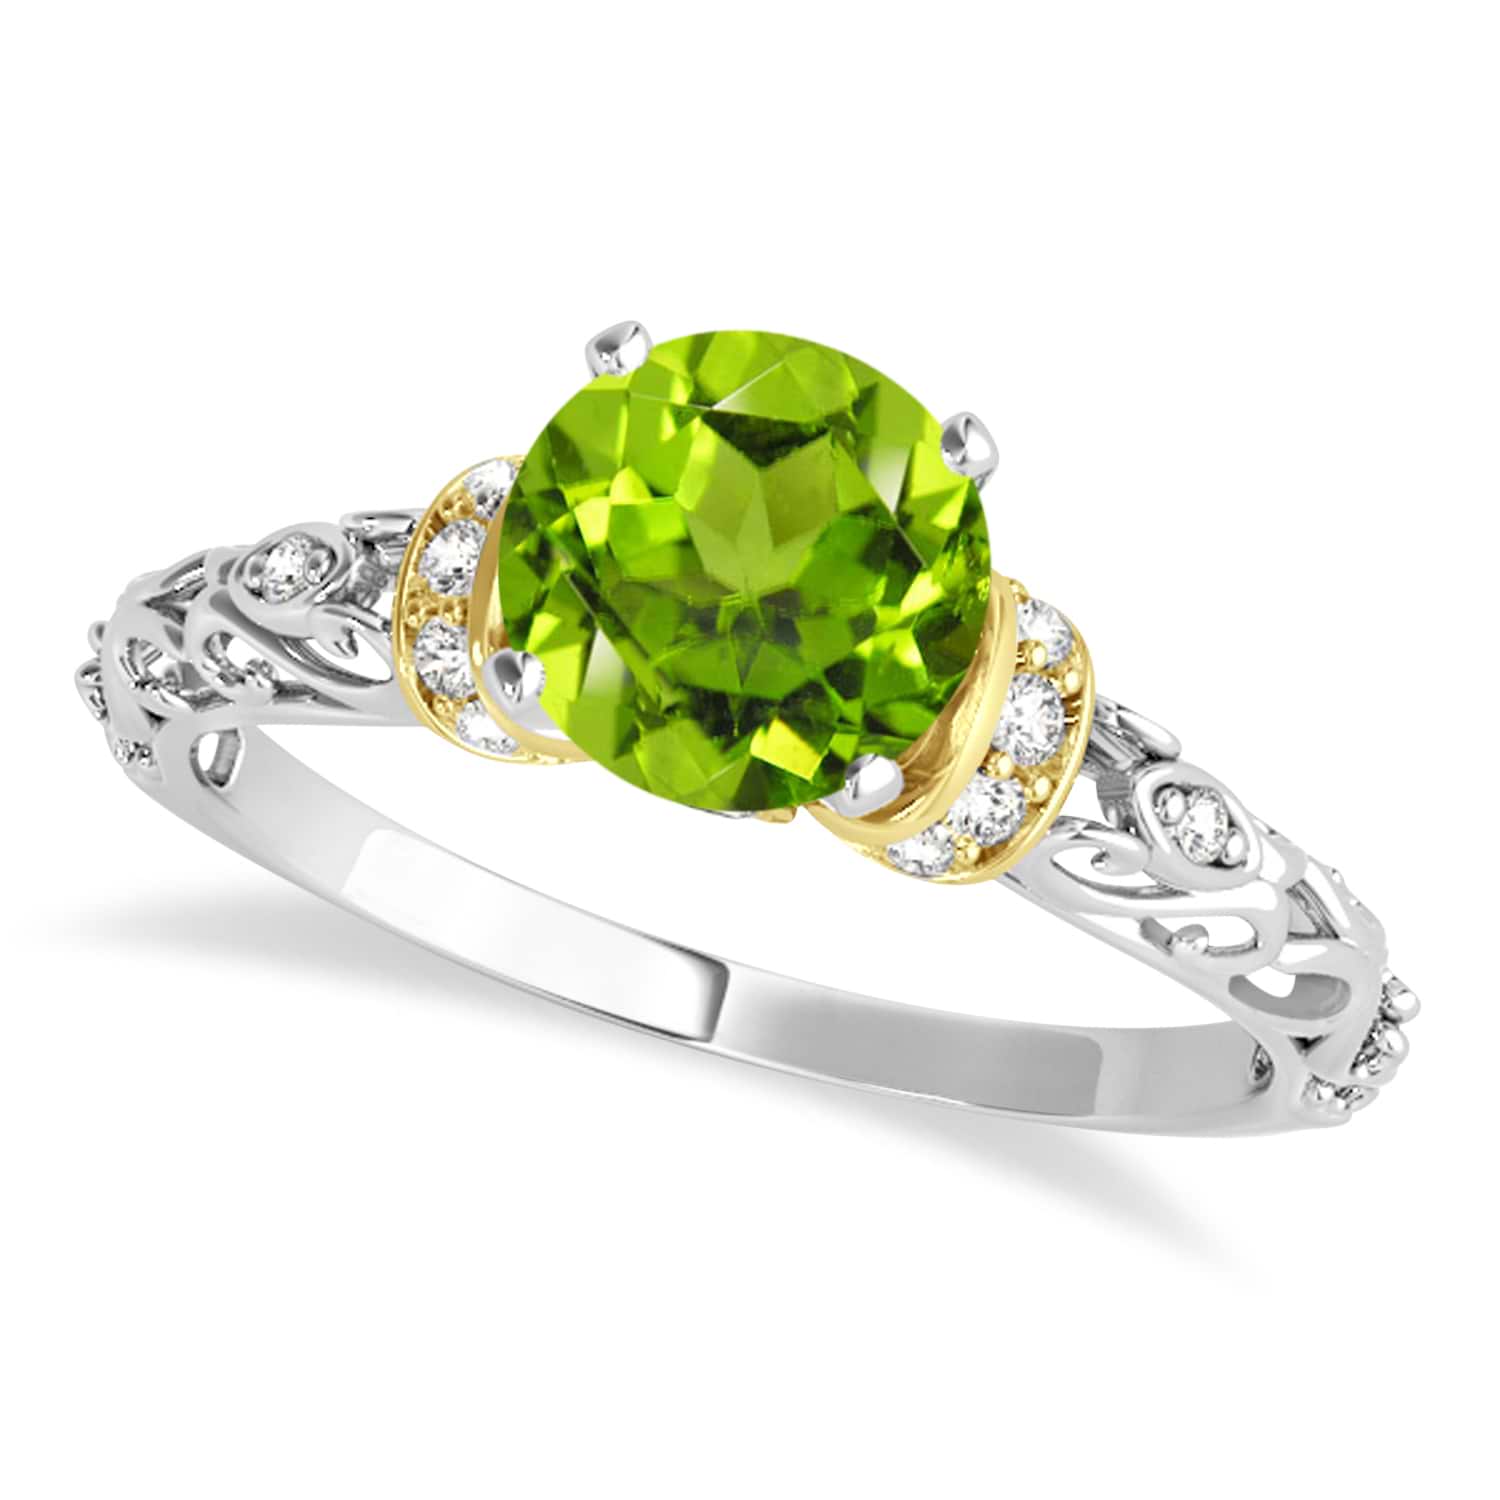 Peridot & Diamond Antique Style Engagement Ring 14k Two-Tone Gold (1.62ct)